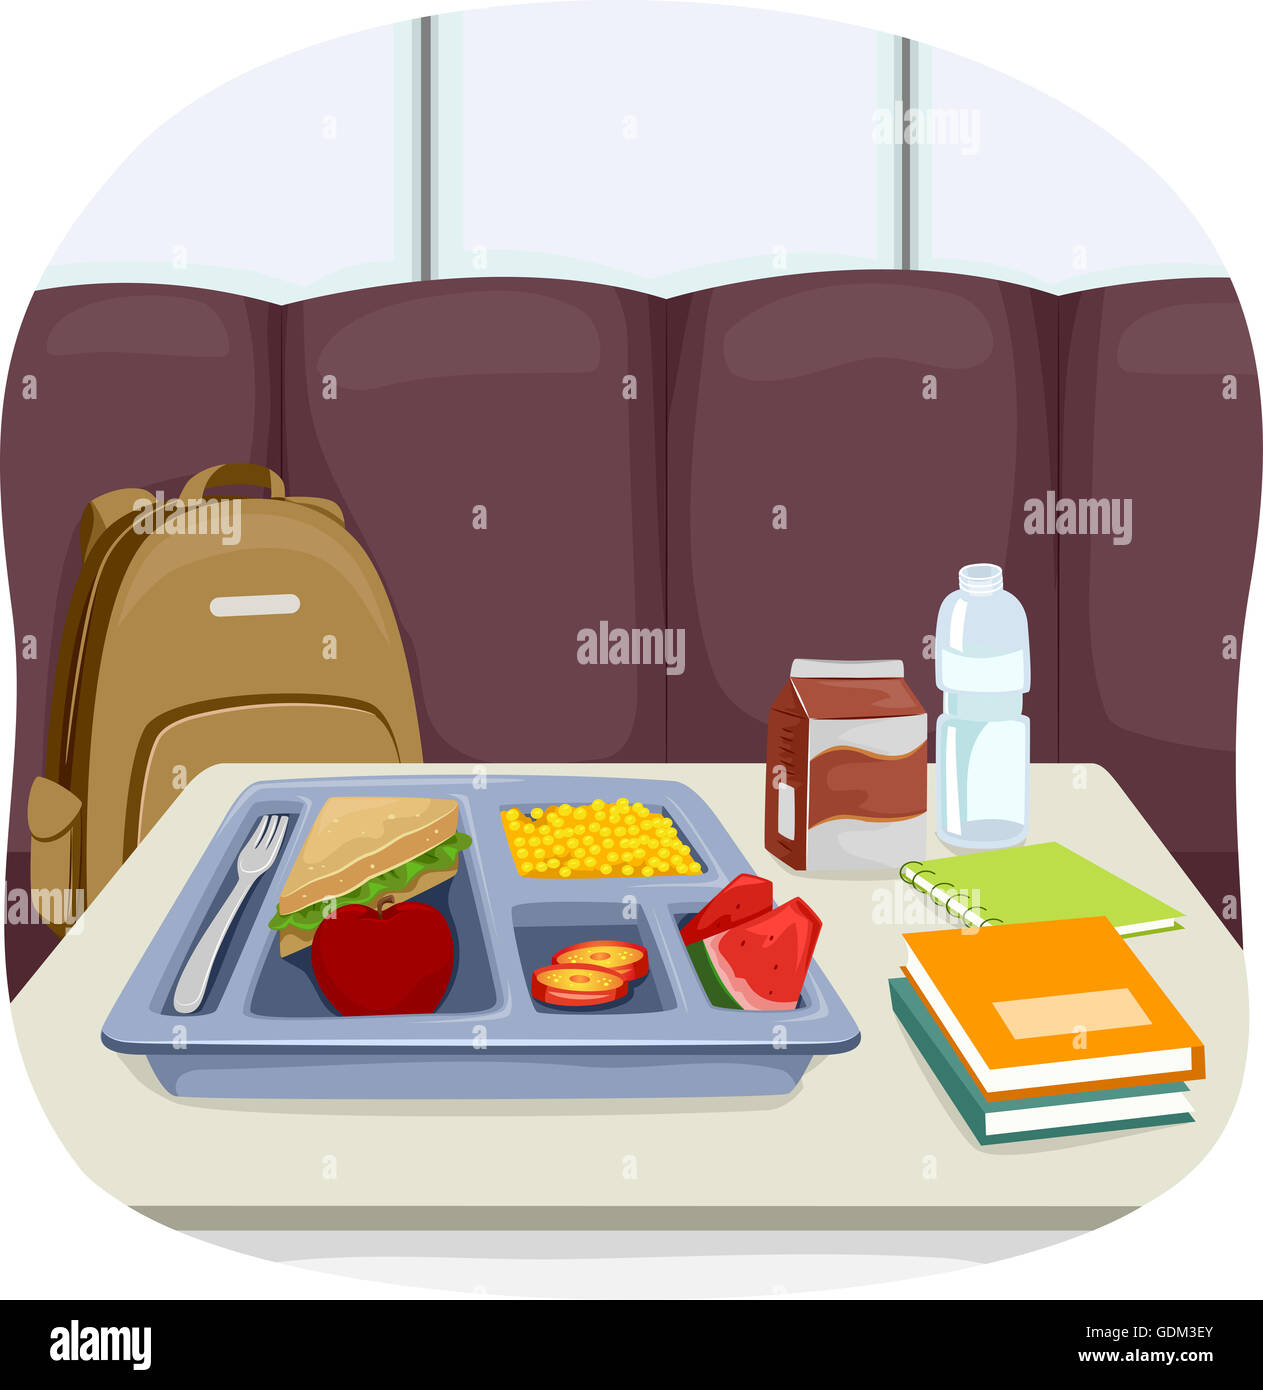 Illustration of a Tray of School Lunch Sitting in the Middle of the Cafeteria Stock Photo